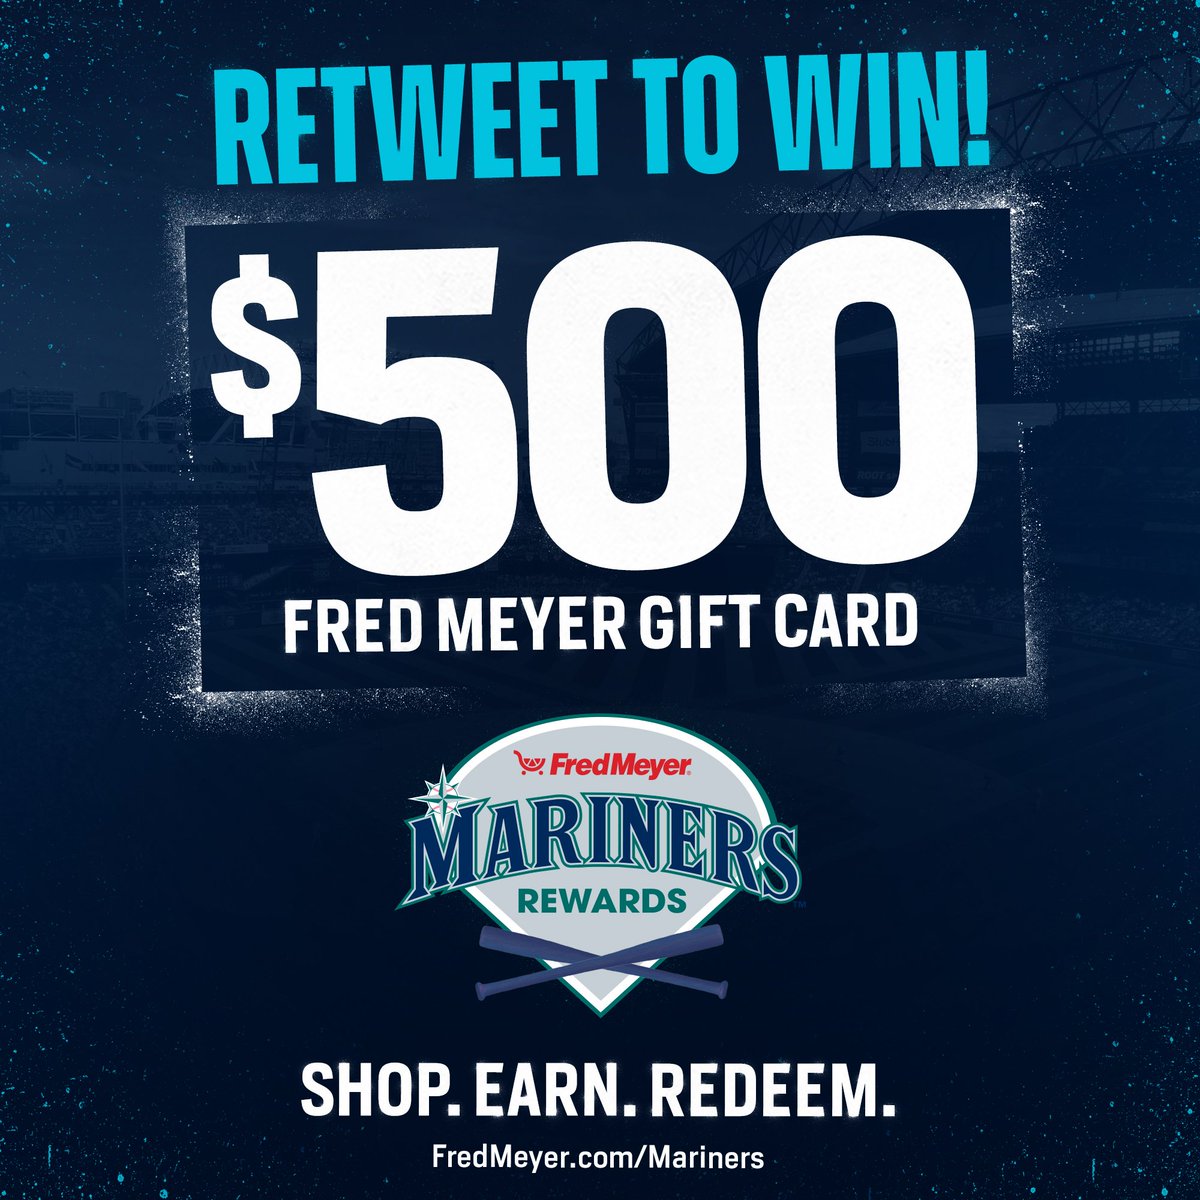 🛒 RETWEET TO WIN 🛒 Our friends at @Fred_Meyer are giving away another $500 gift card as we celebrate the all-new Mariners Rewards program. All you have to do is hit that retweet button for a chance to win!